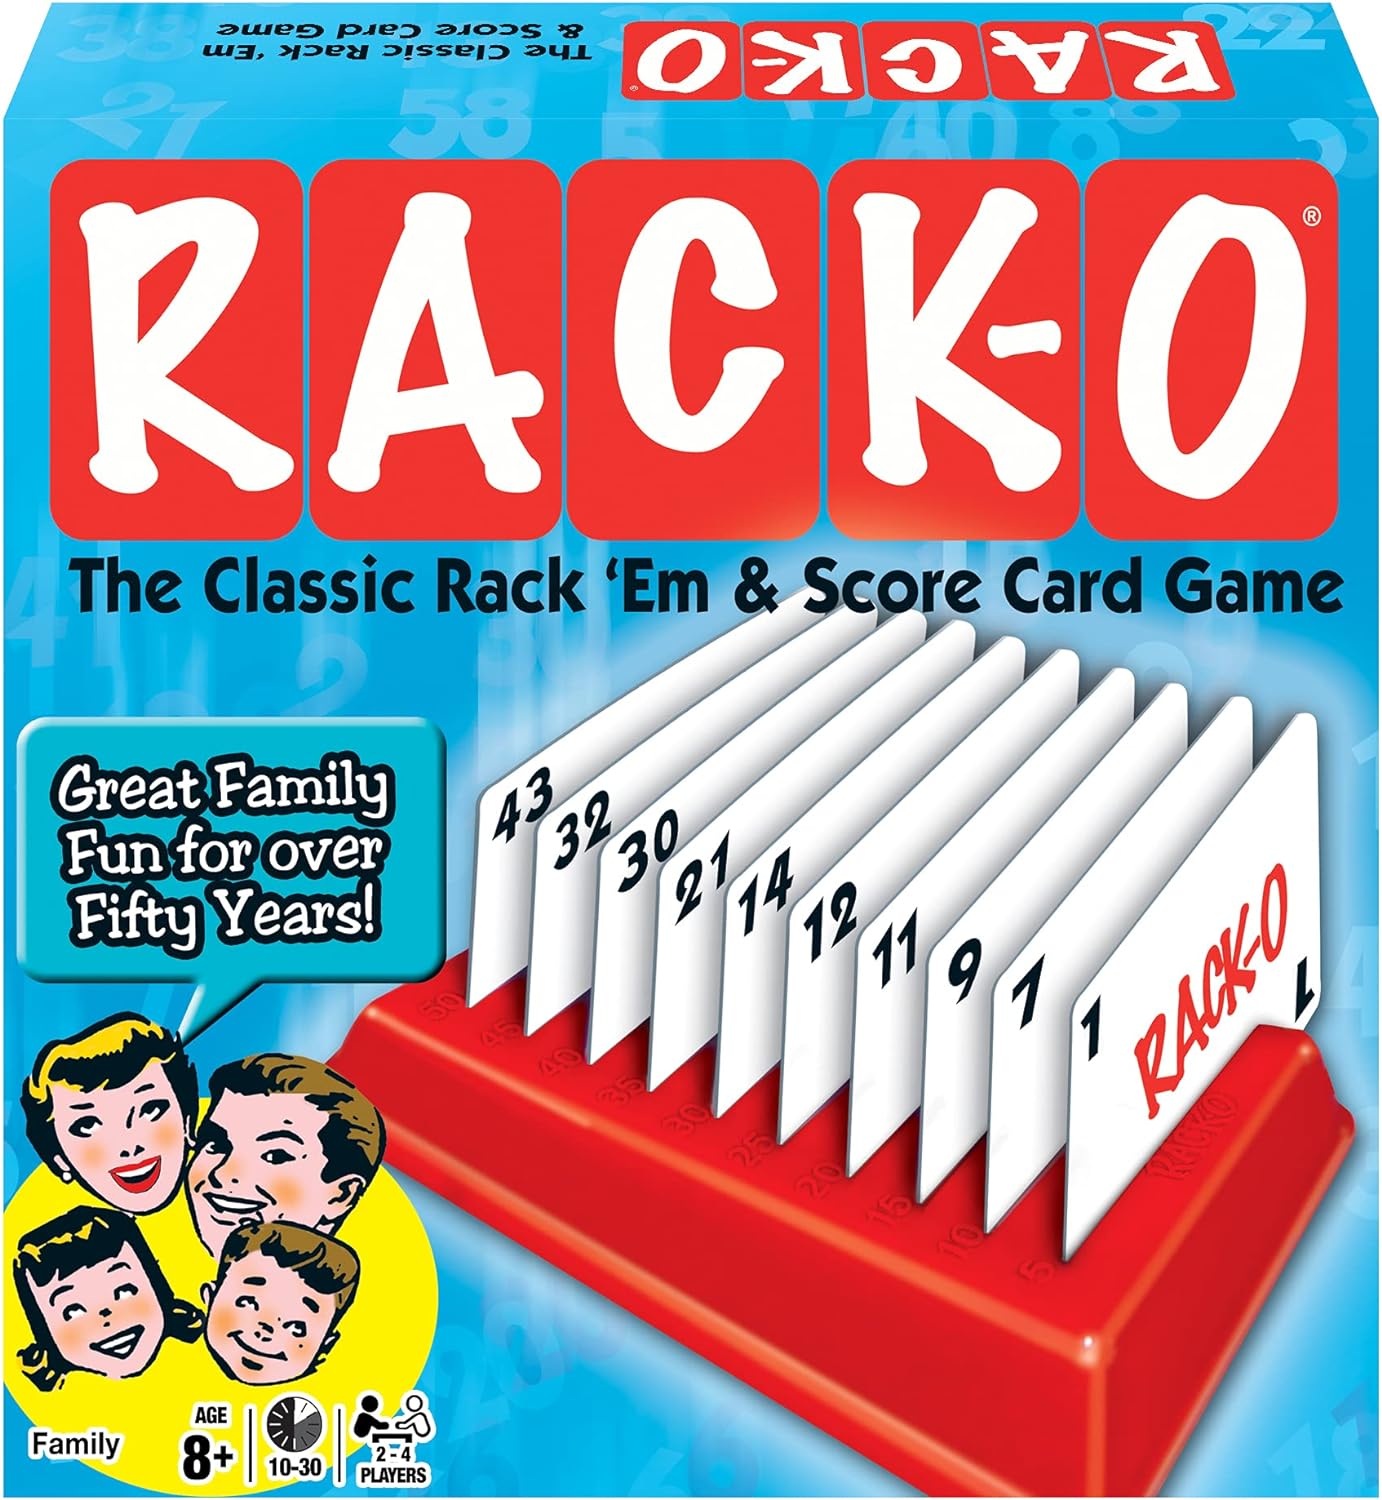 Rack-O Retro Game by Winning Moves Games USA, Classic Tabletop Game Enjoyed by Families Since the 1950's! Ages 8+, 2-4 Players (6122) - 100009